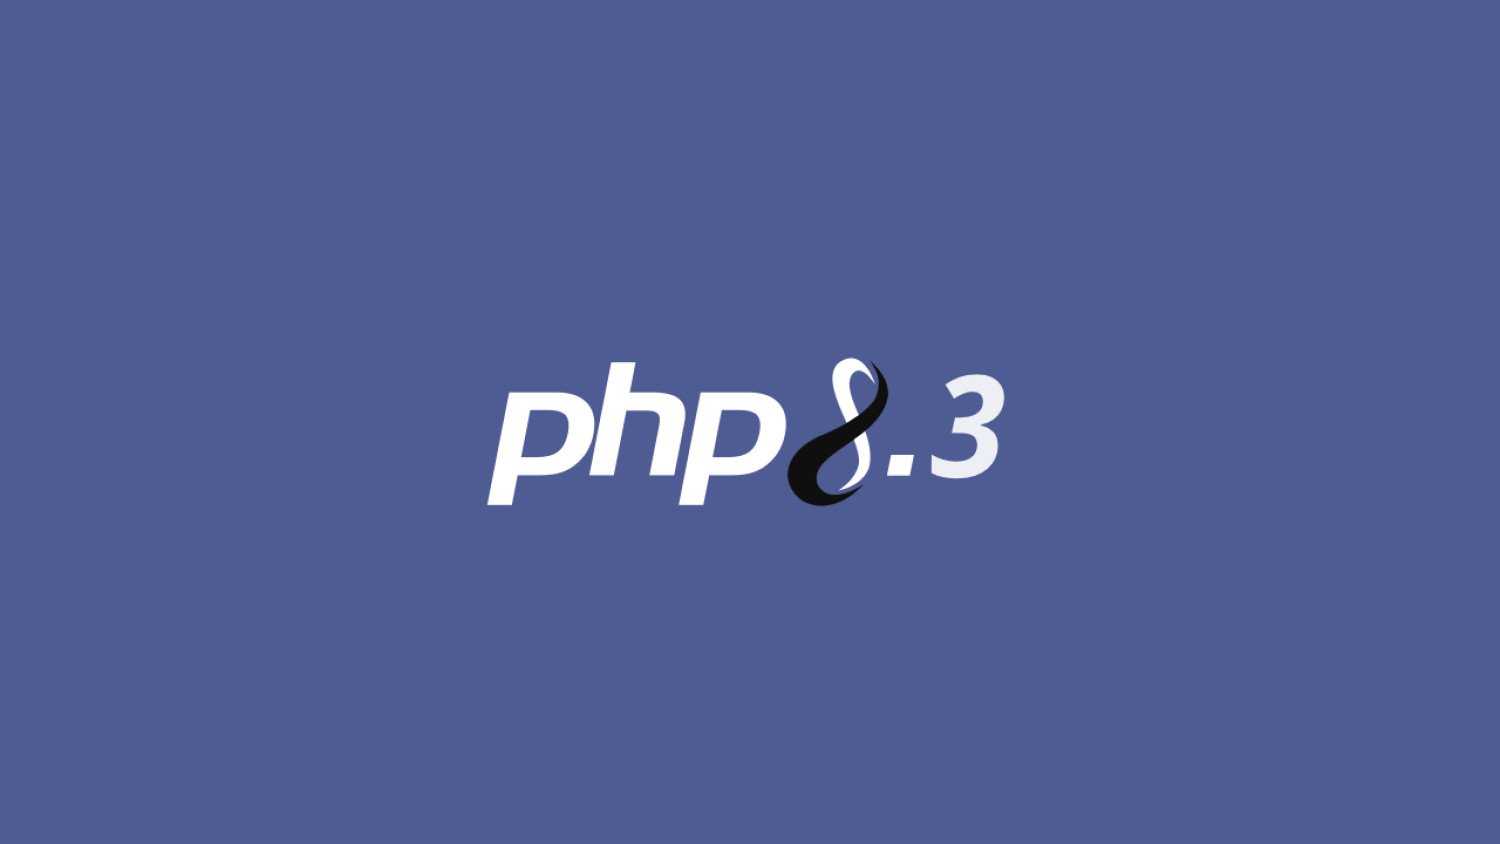 New Features and Improvements in PHP 8.3